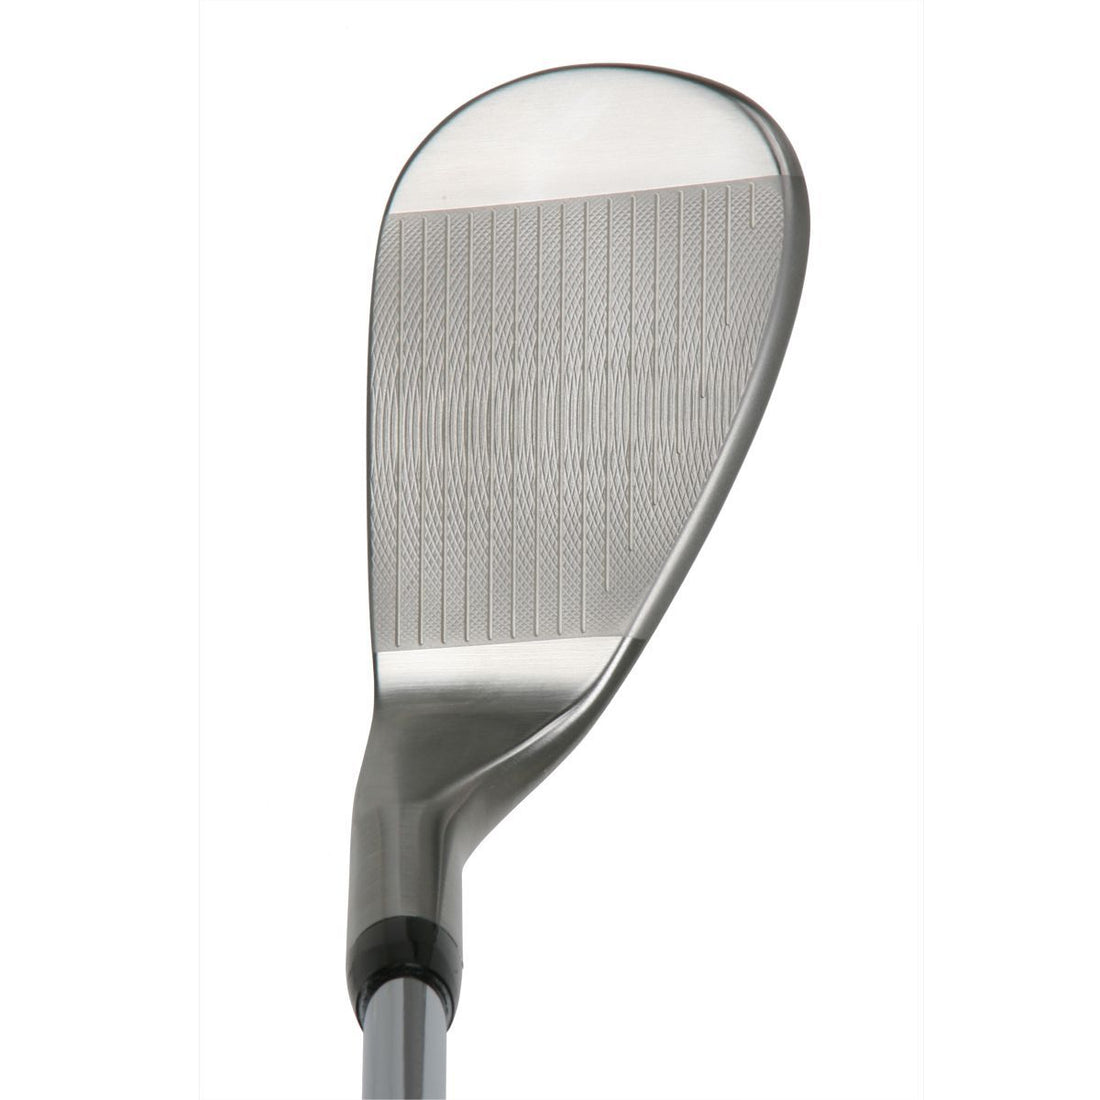 address view of the Orlimar Spin Tech Wedge with minimal offset